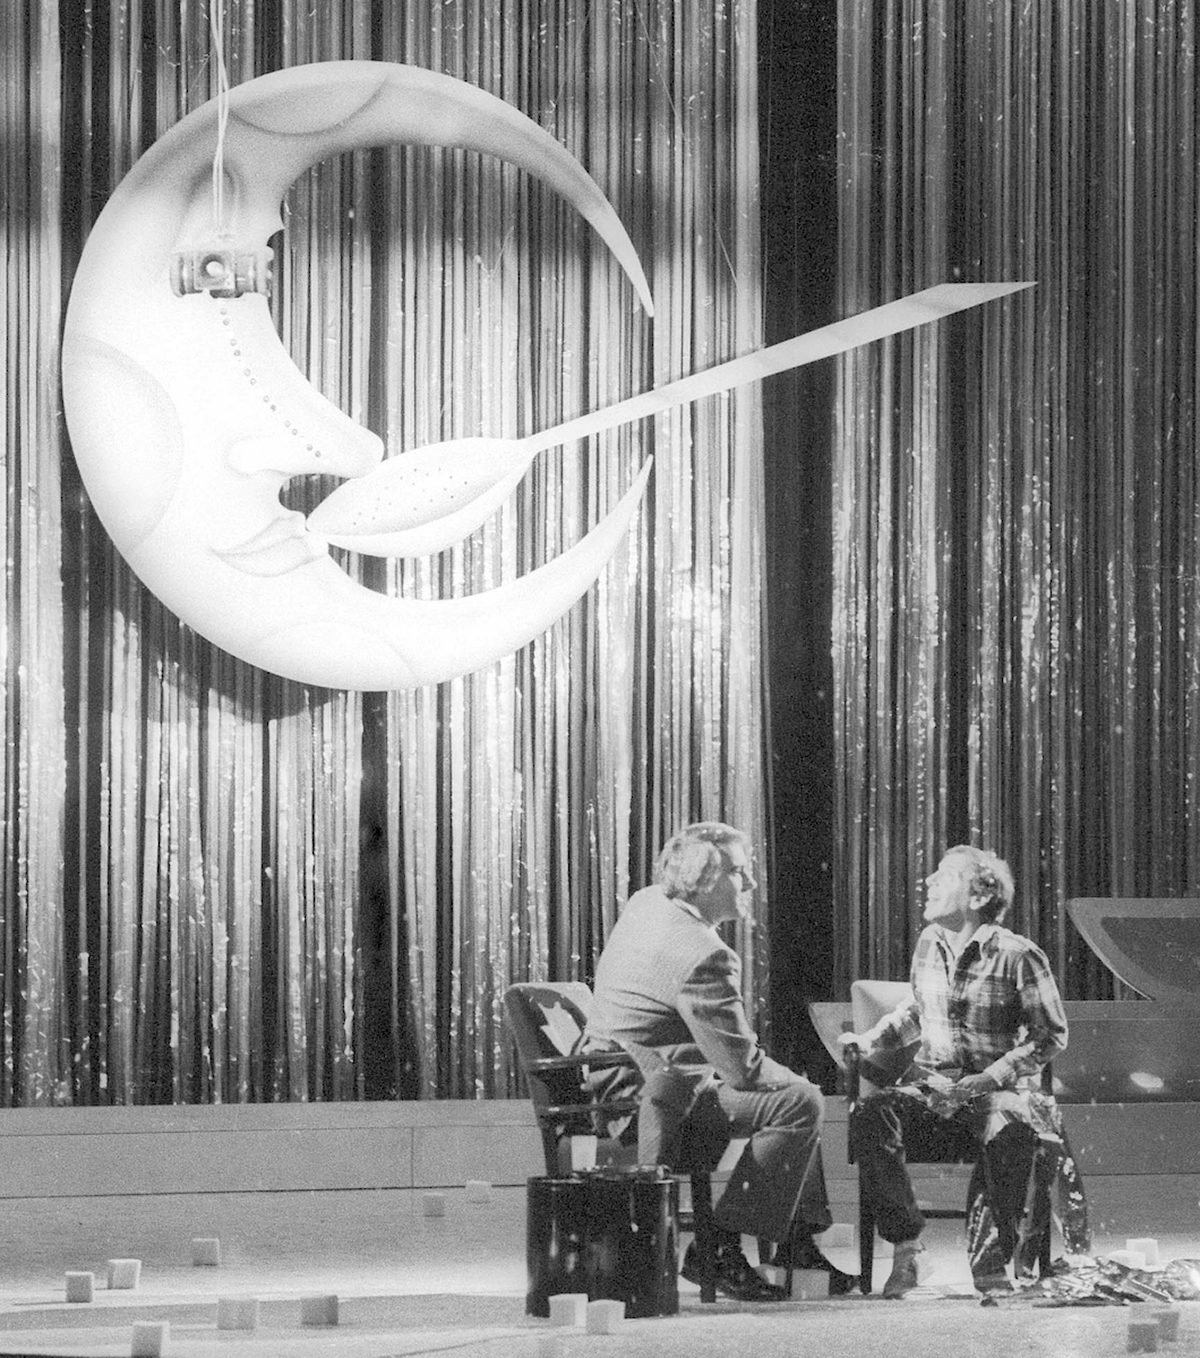 Image of Moon and Spoon at Studio 54